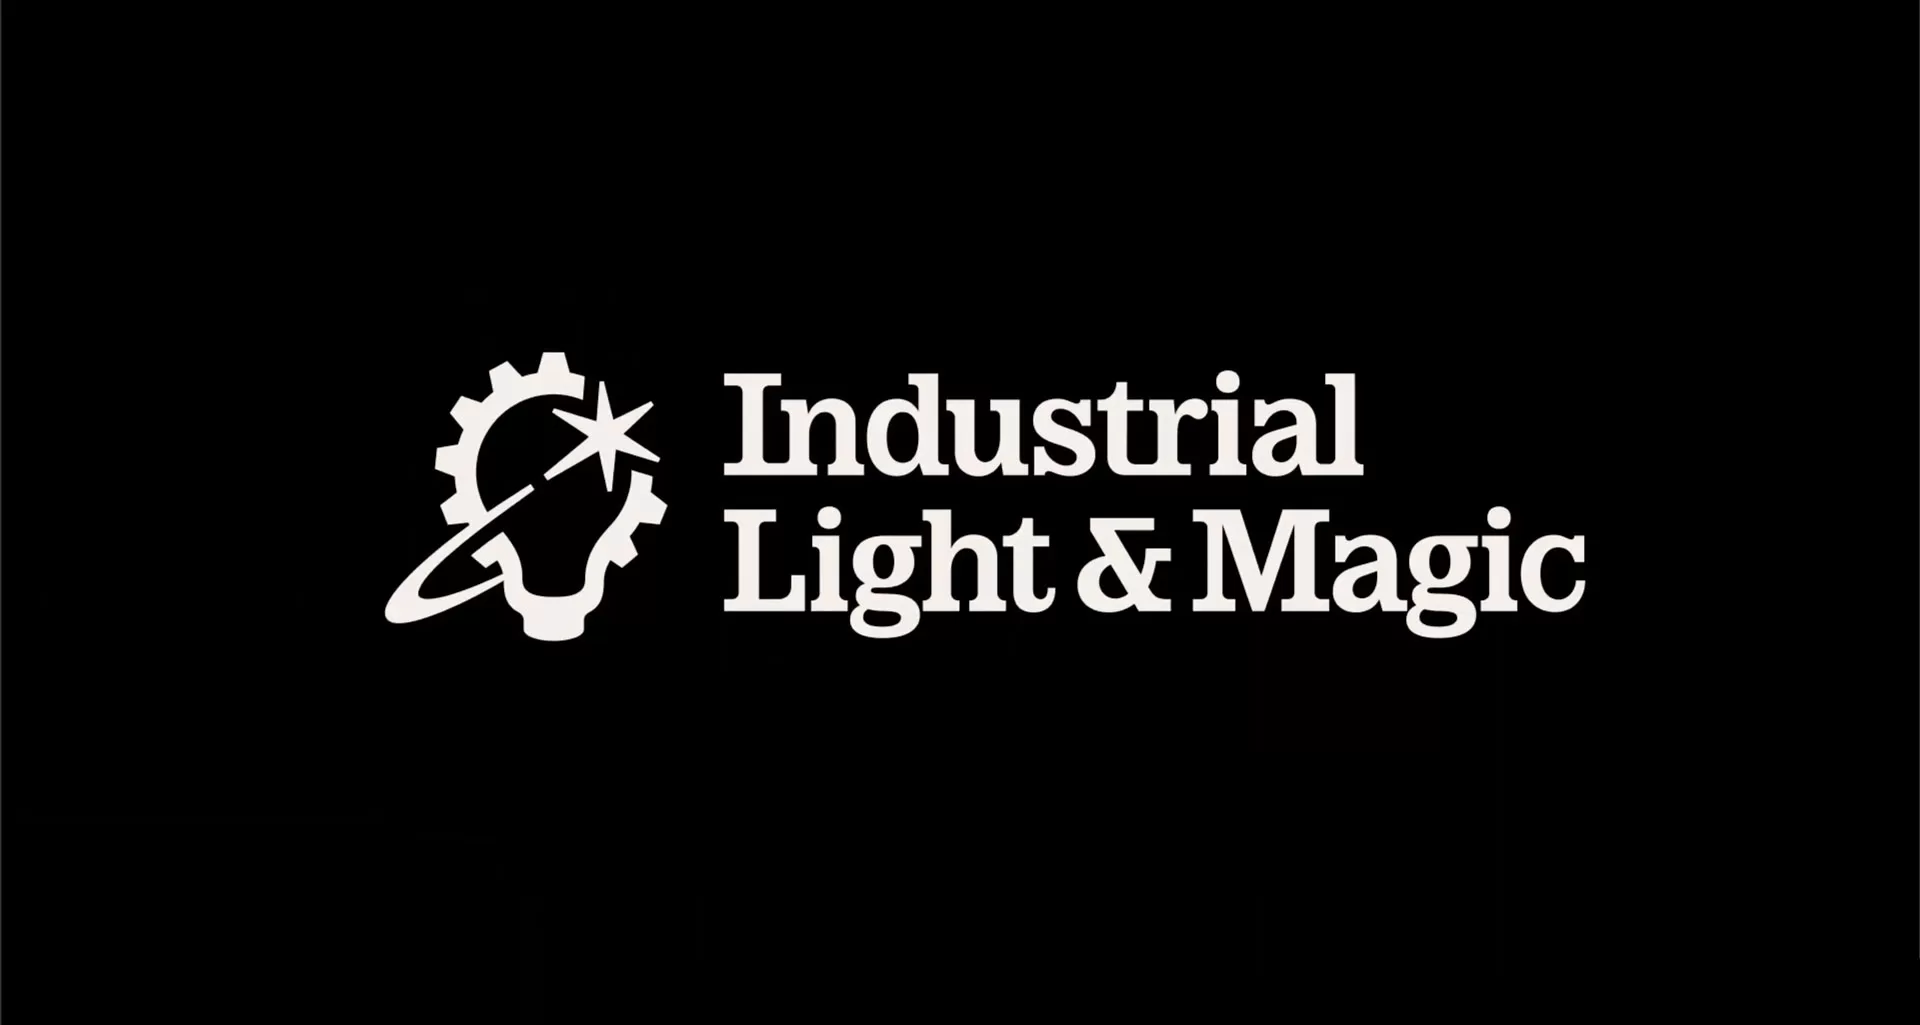 Industrial & Magic: Brand Reveal - The Art of VFX